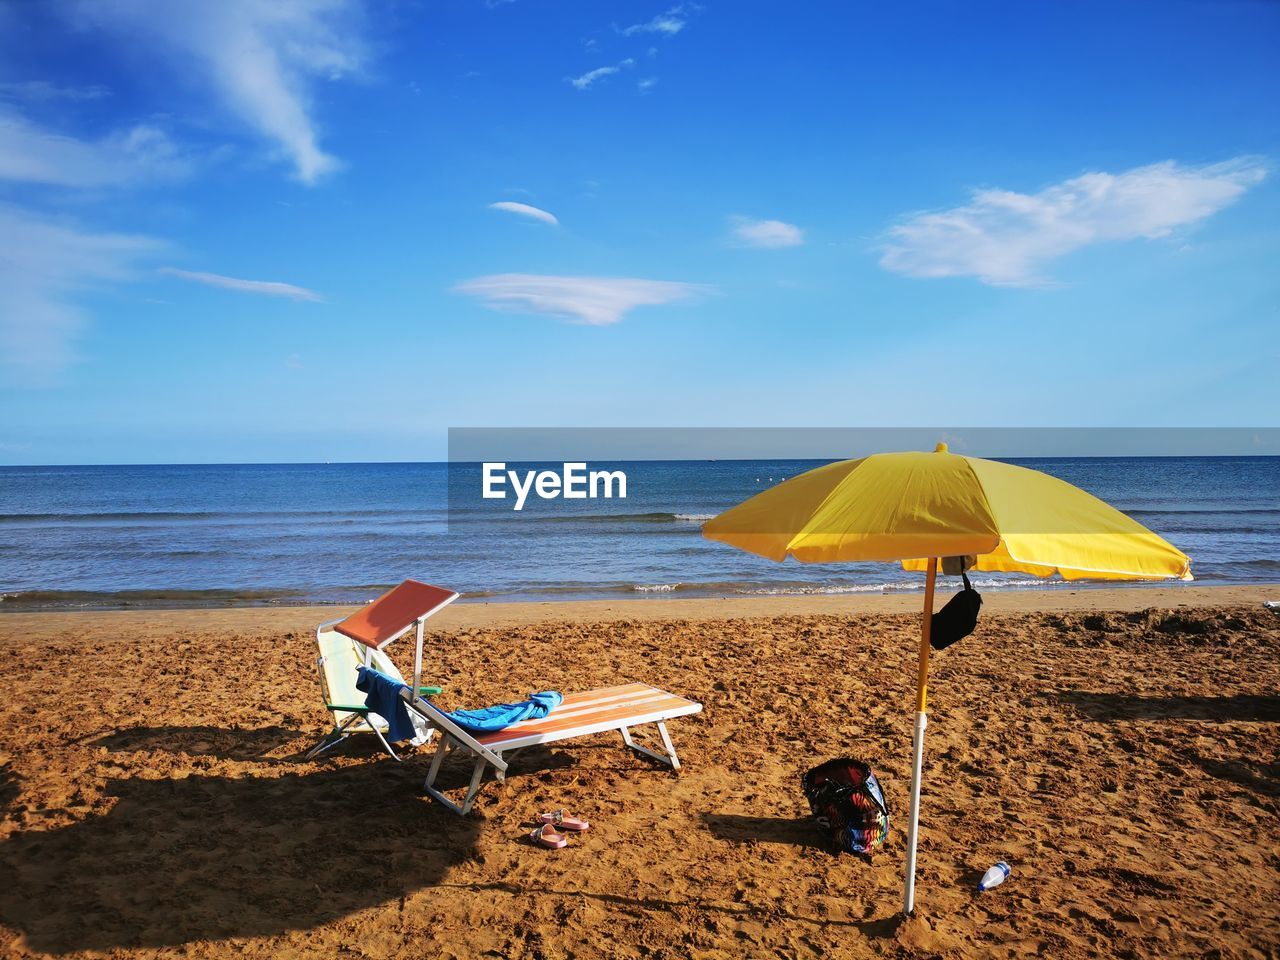 beach, land, water, sea, sky, sand, umbrella, nature, horizon over water, chair, horizon, ocean, vacation, summer, trip, beauty in nature, shore, parasol, holiday, tranquility, scenics - nature, beach umbrella, cloud, body of water, tranquil scene, relaxation, coast, protection, sunshade, shade, blue, travel destinations, sunlight, seat, lounge chair, idyllic, day, travel, security, deck chair, outdoors, no people, absence, outdoor chair, sun, coastline, tourism, sunny, environment, tropical climate, urban skyline, leisure activity, copy space